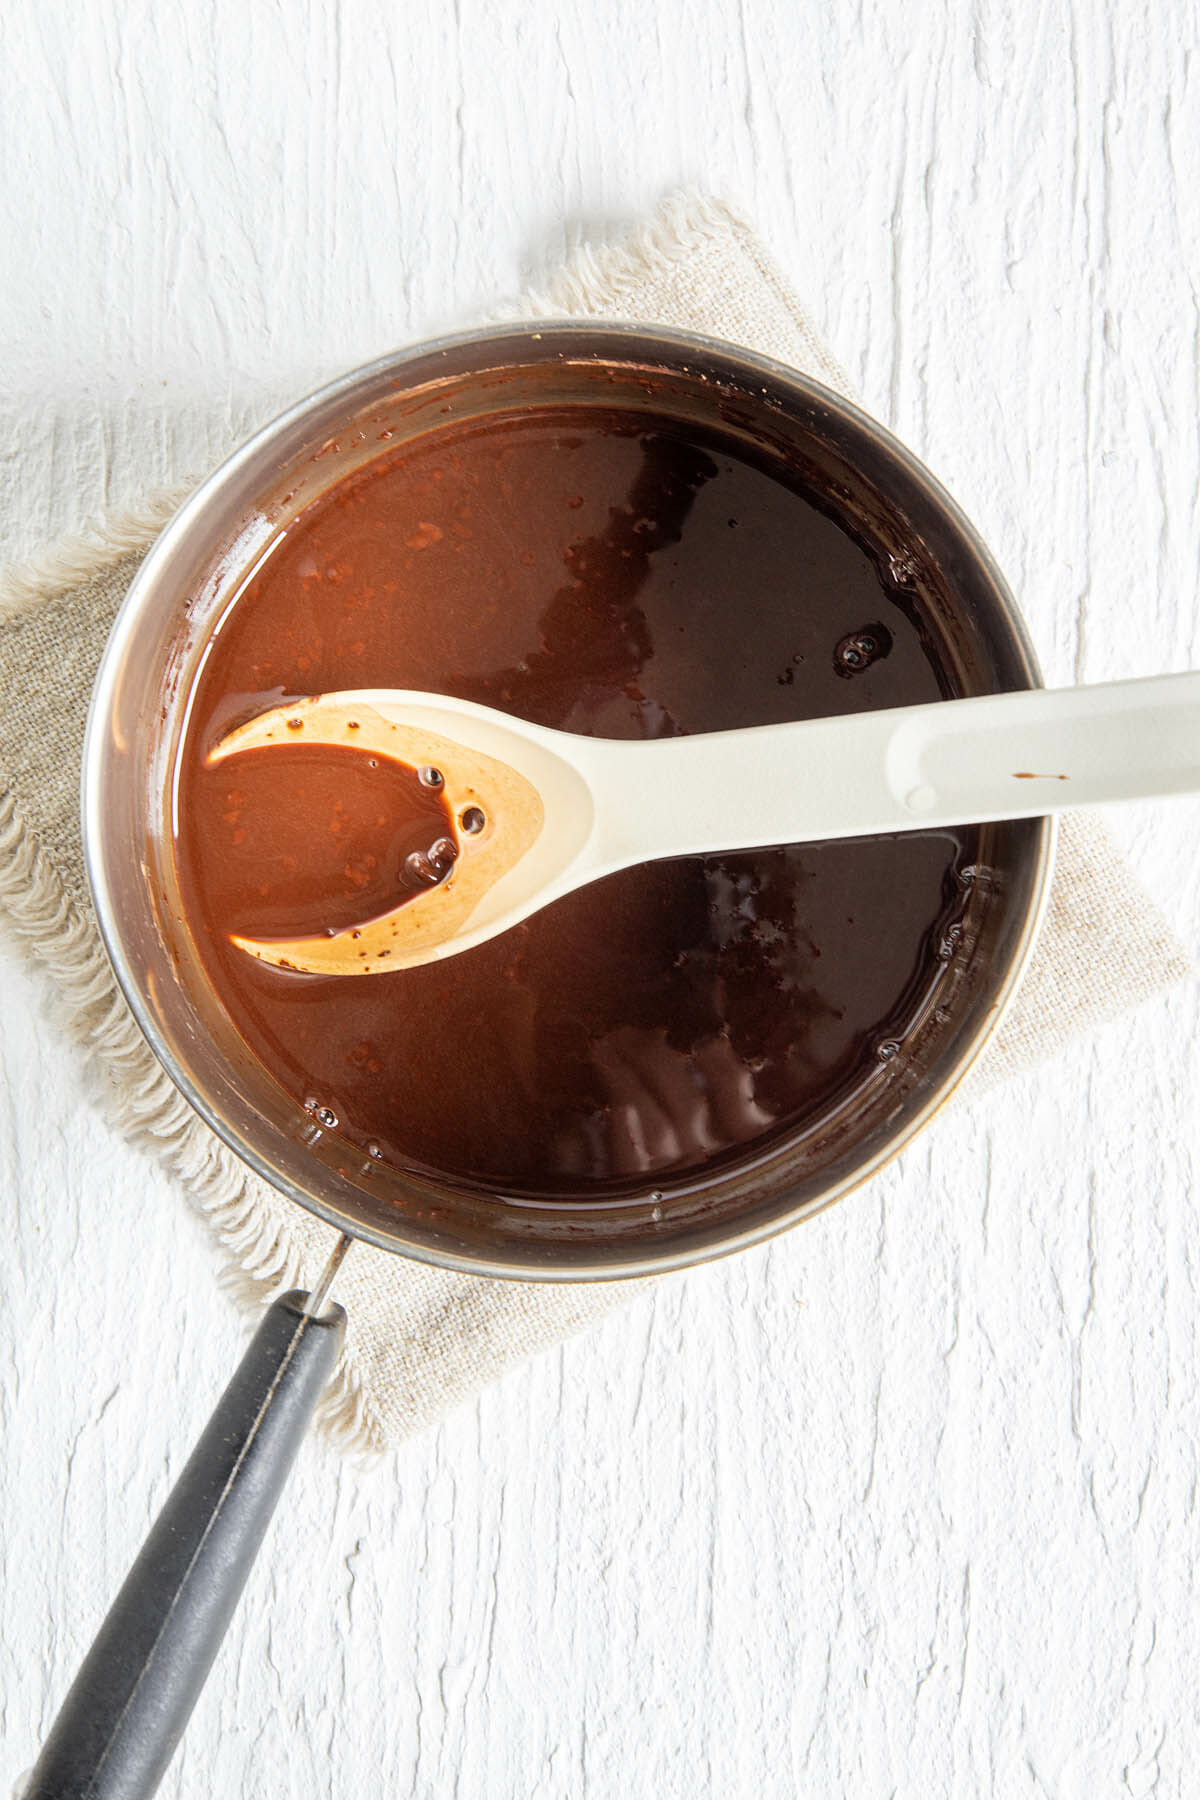 Chocolate simple syrup in a saucepan.